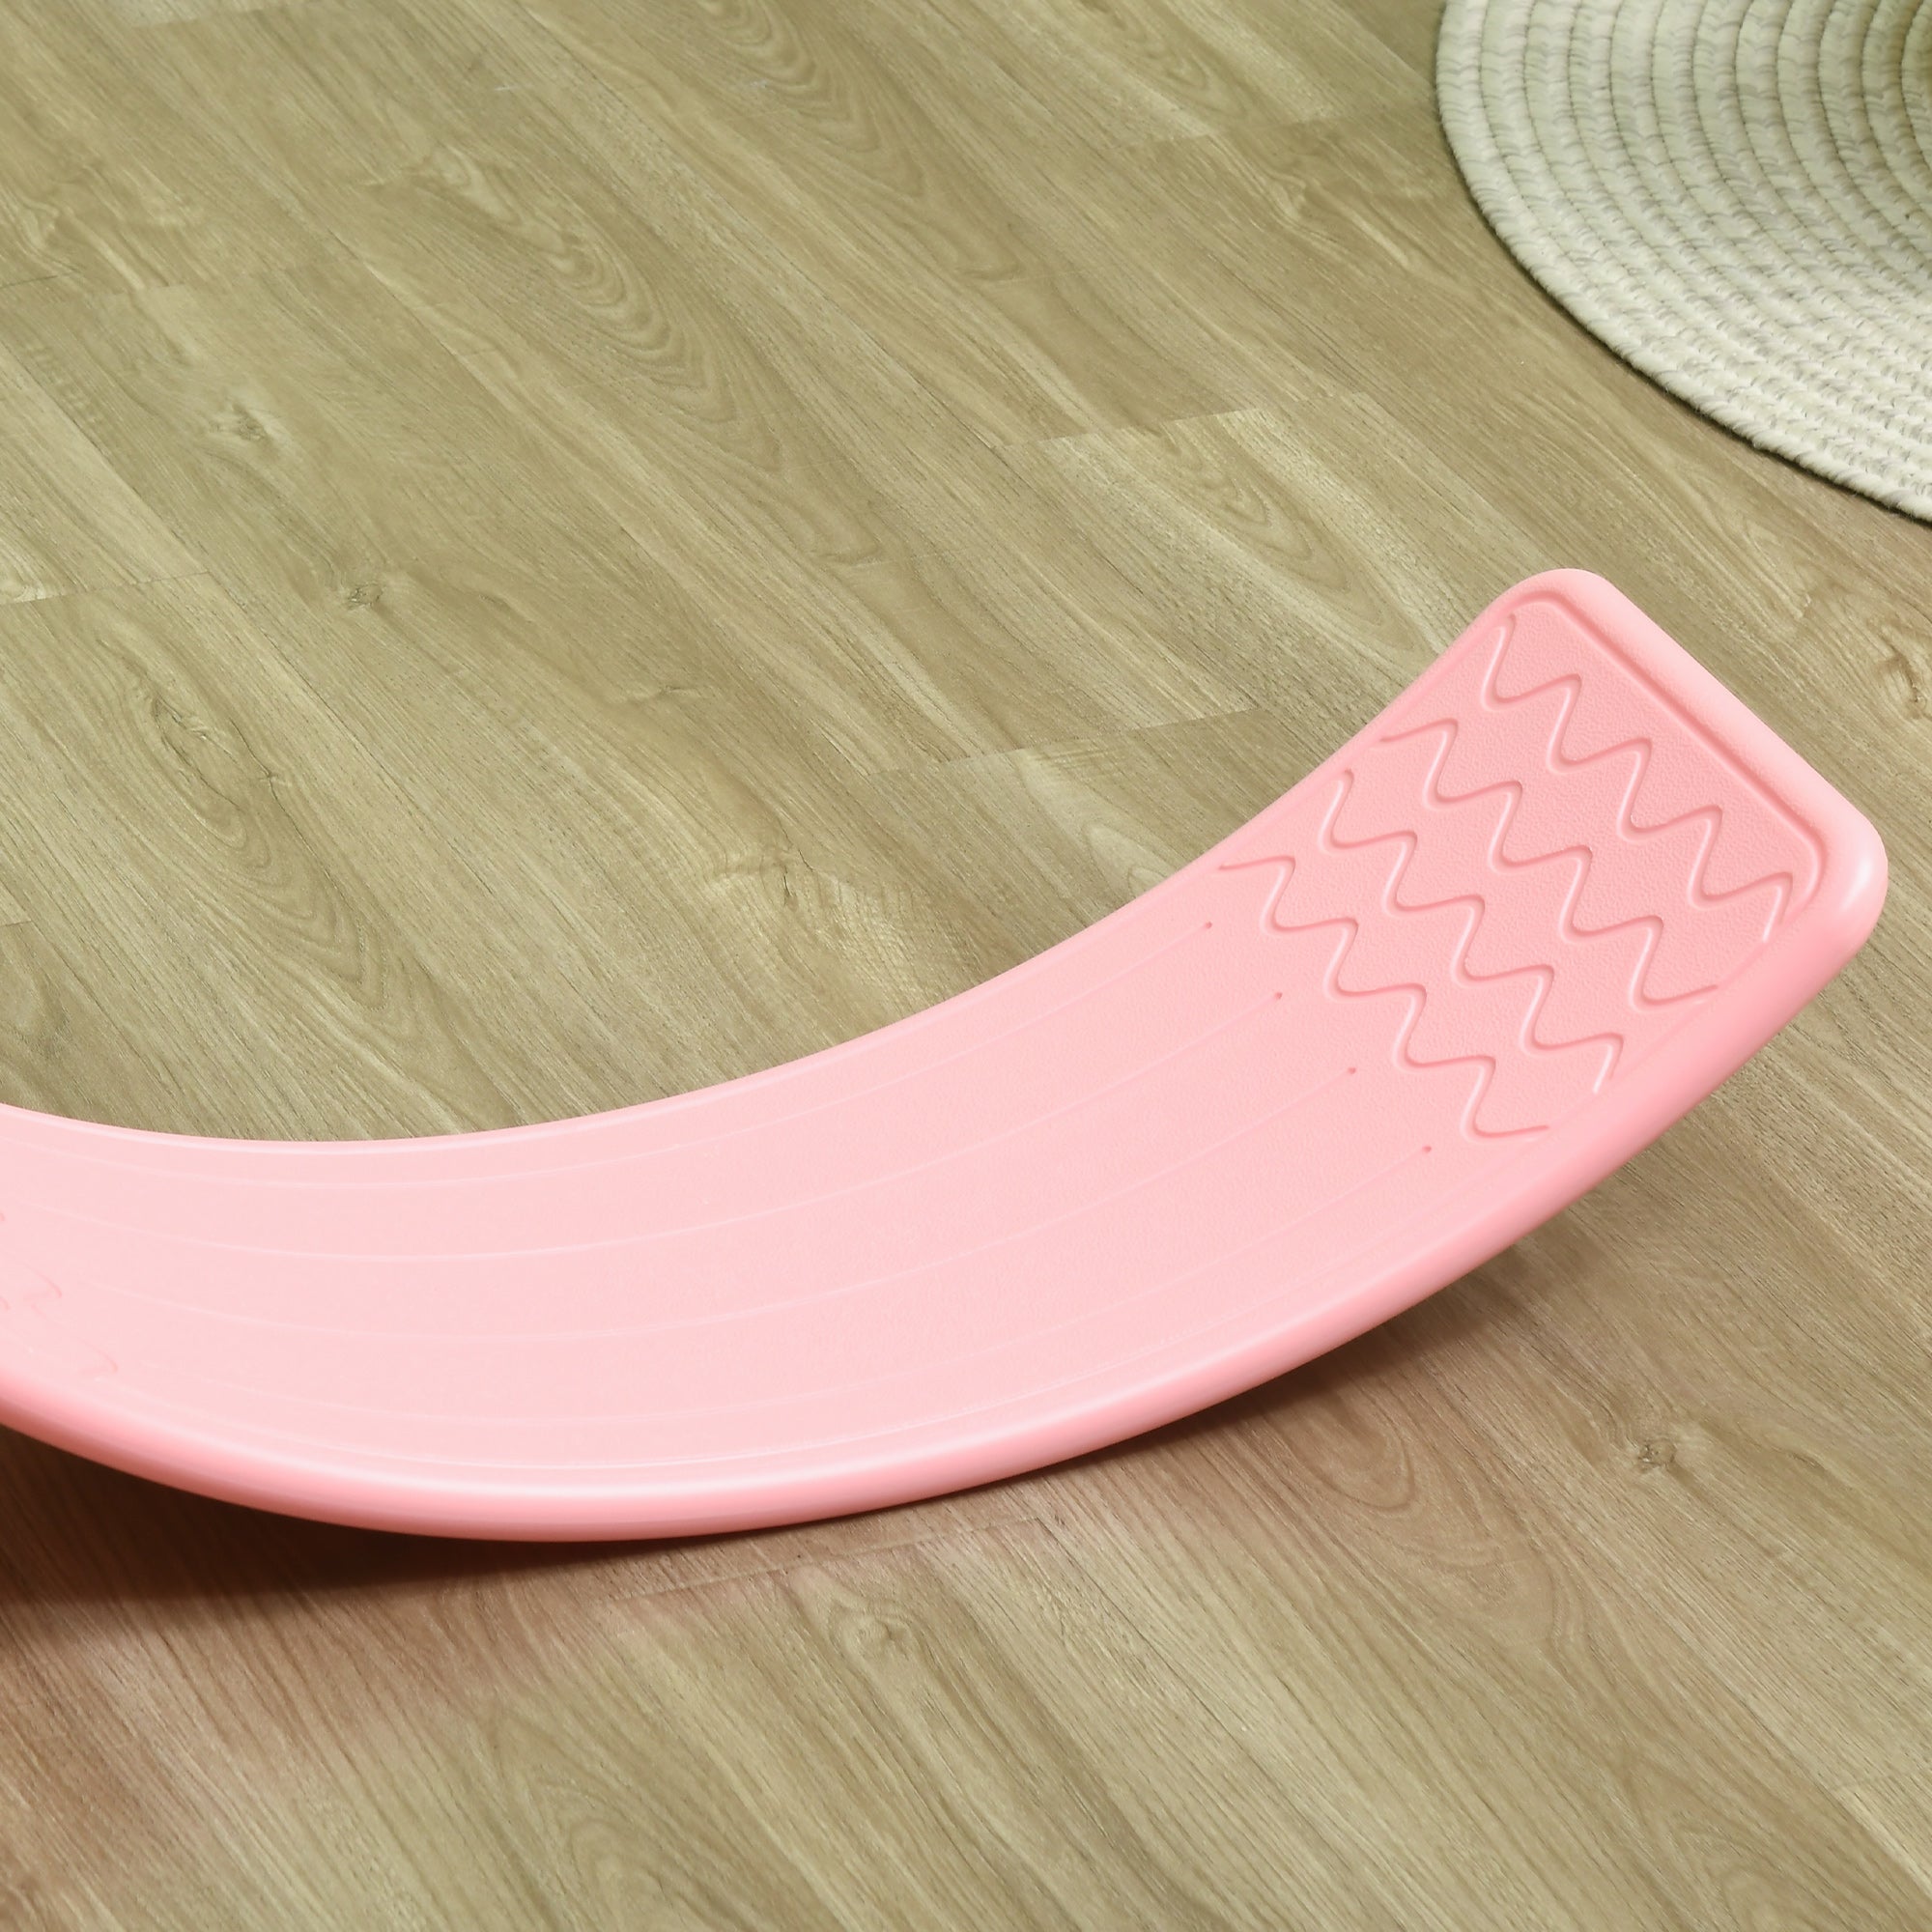 ZONEKIZ Pink Balance Board, Wobble Exercise Board for Children Ages 3-6, Coordination and Balance Improvement - TovaHaus